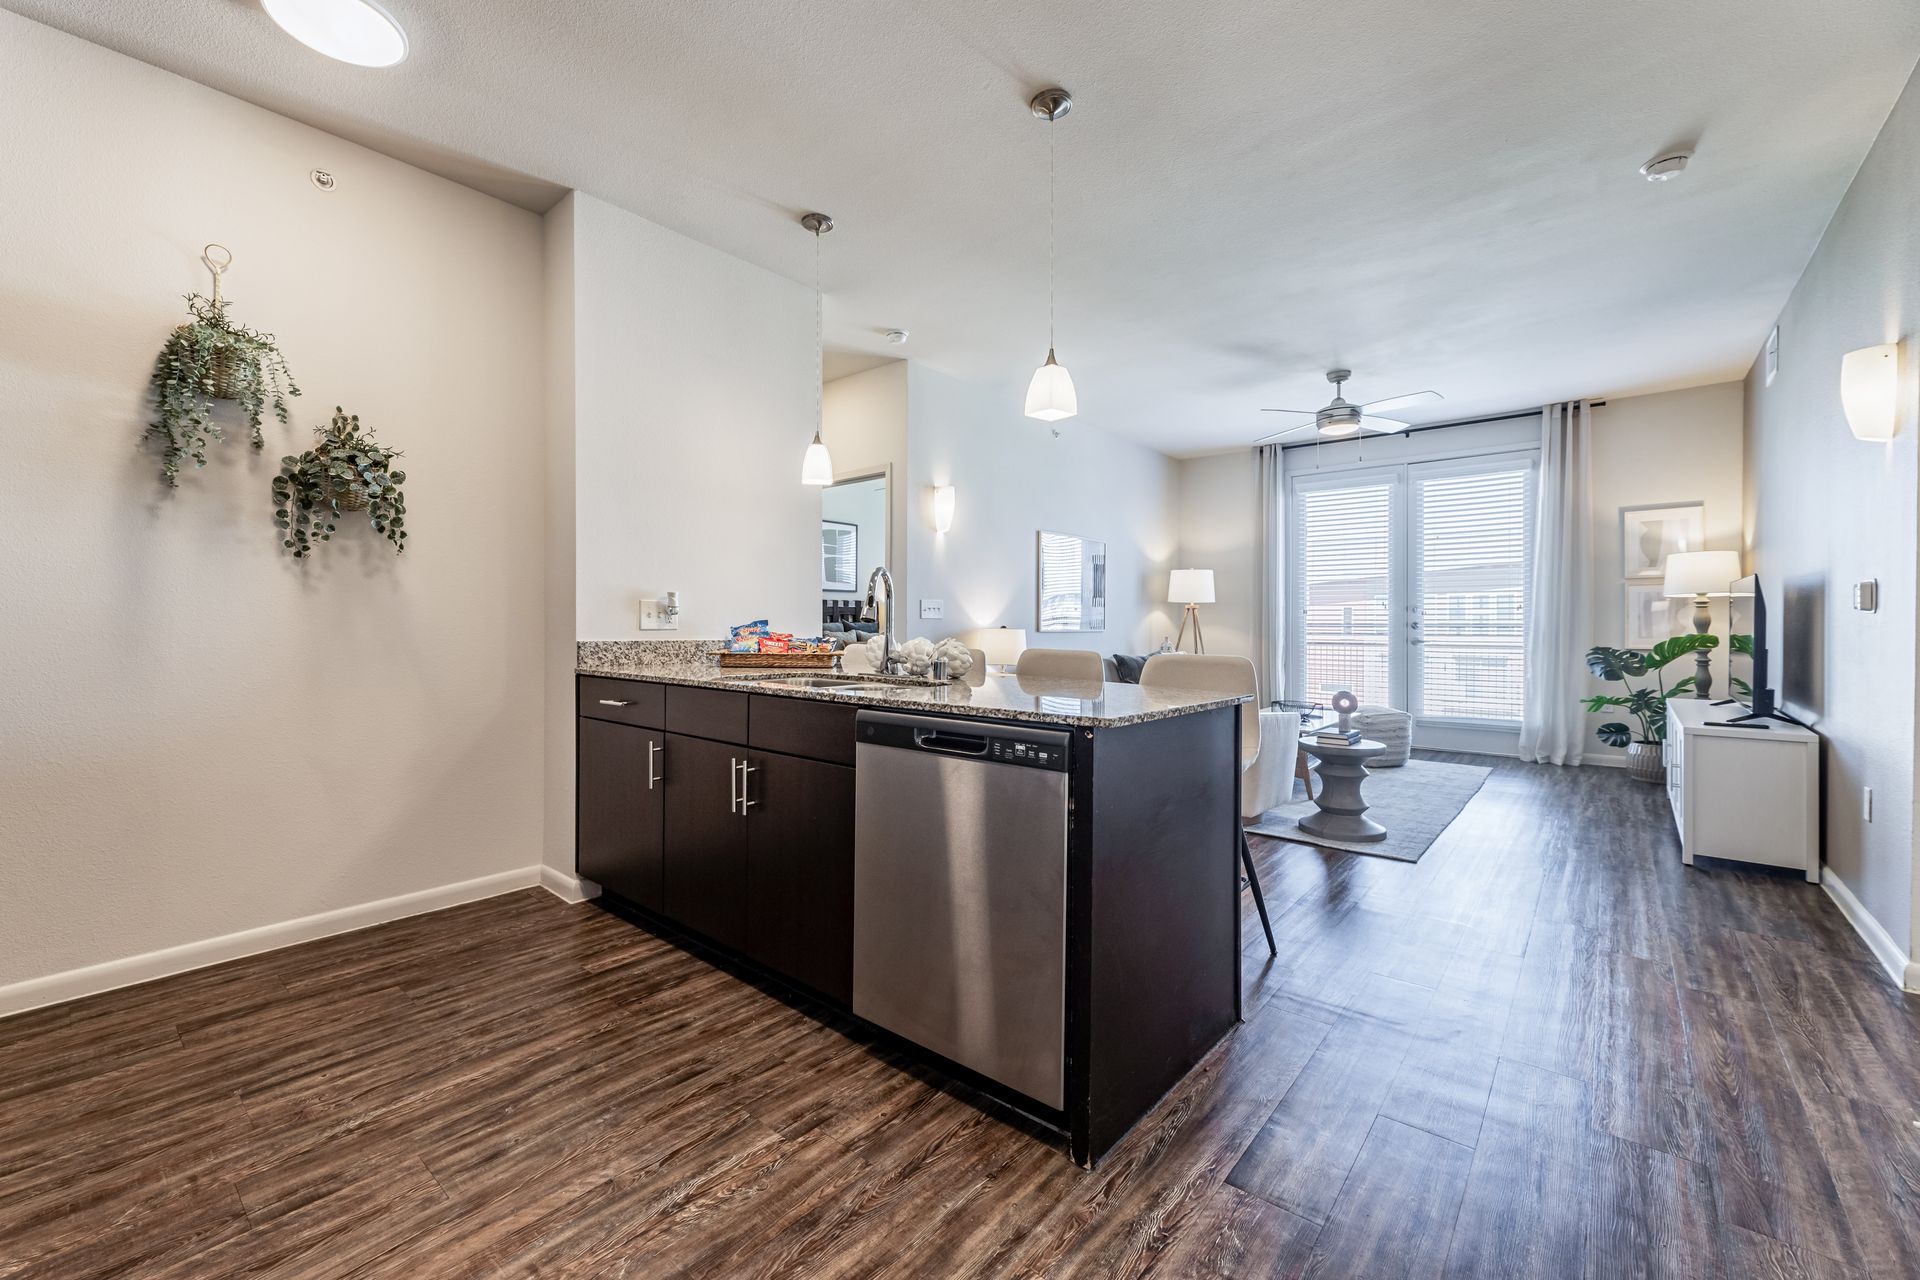 Apartment kitchen with stainless steel appliances and wooden floors in a living room at Parkside at Craig Ranch.